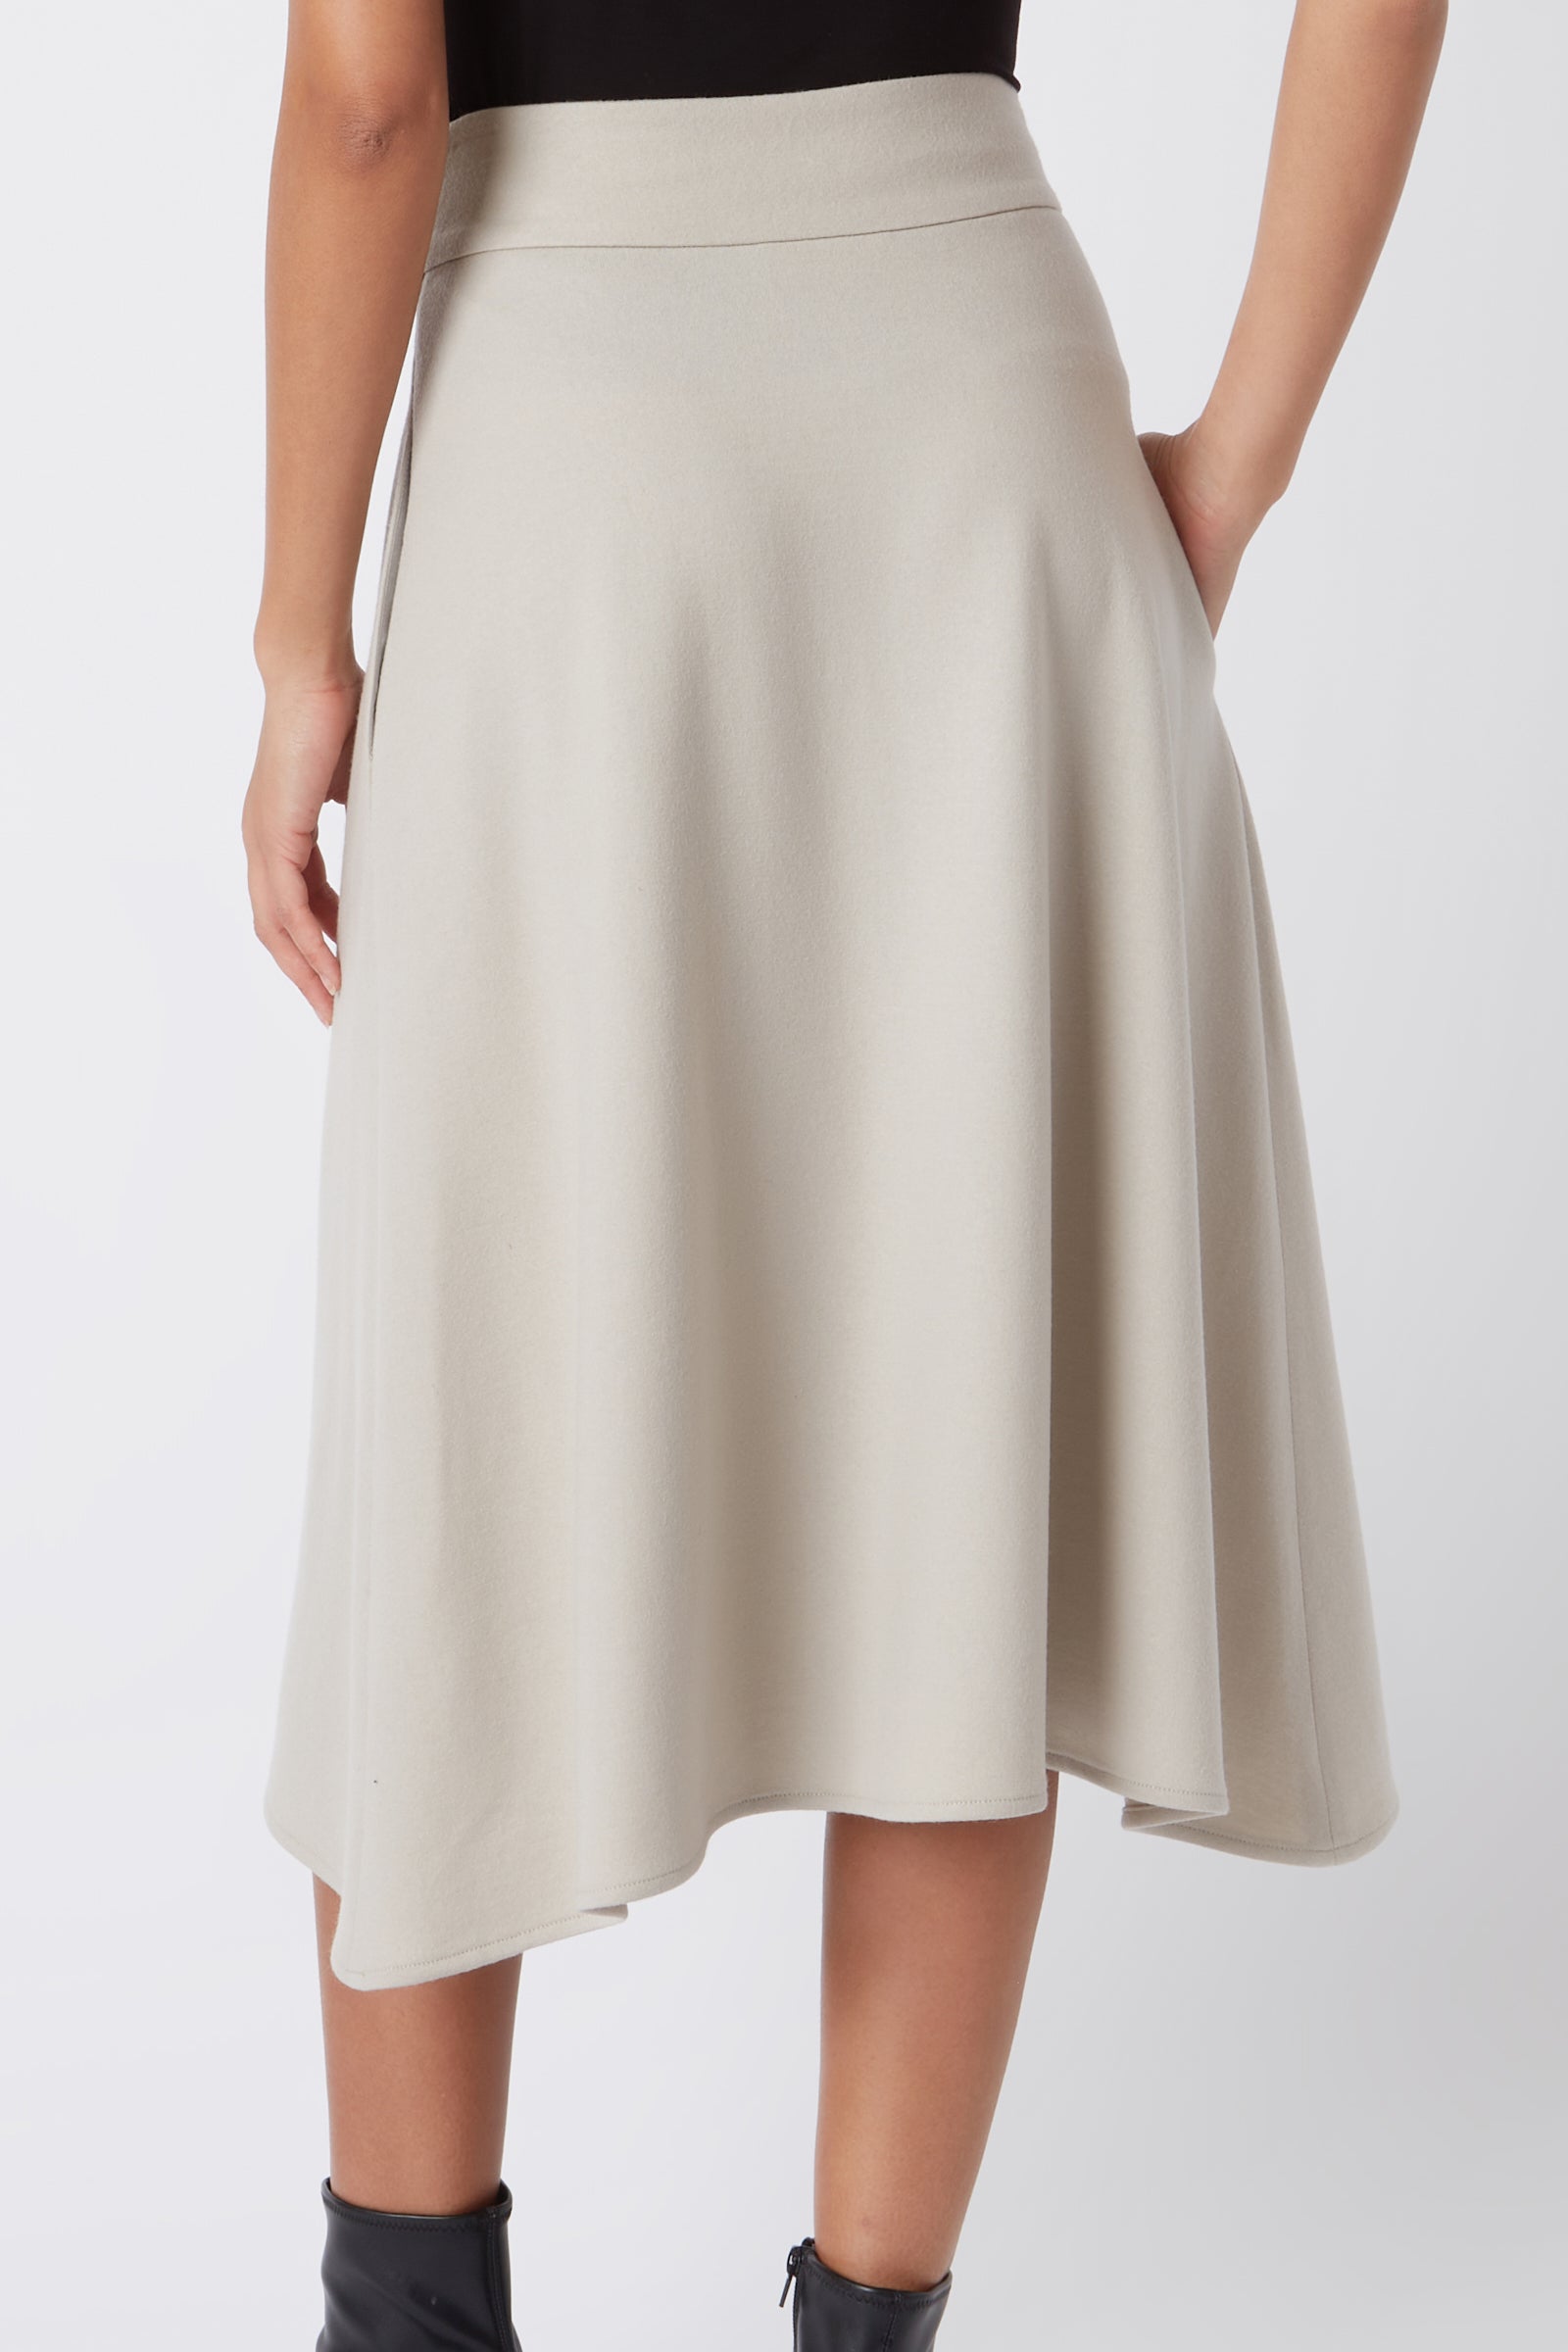 Kal Rieman Martina Felted Jersey Kick Skirt in Mink on Model Cropped Detailed Back View